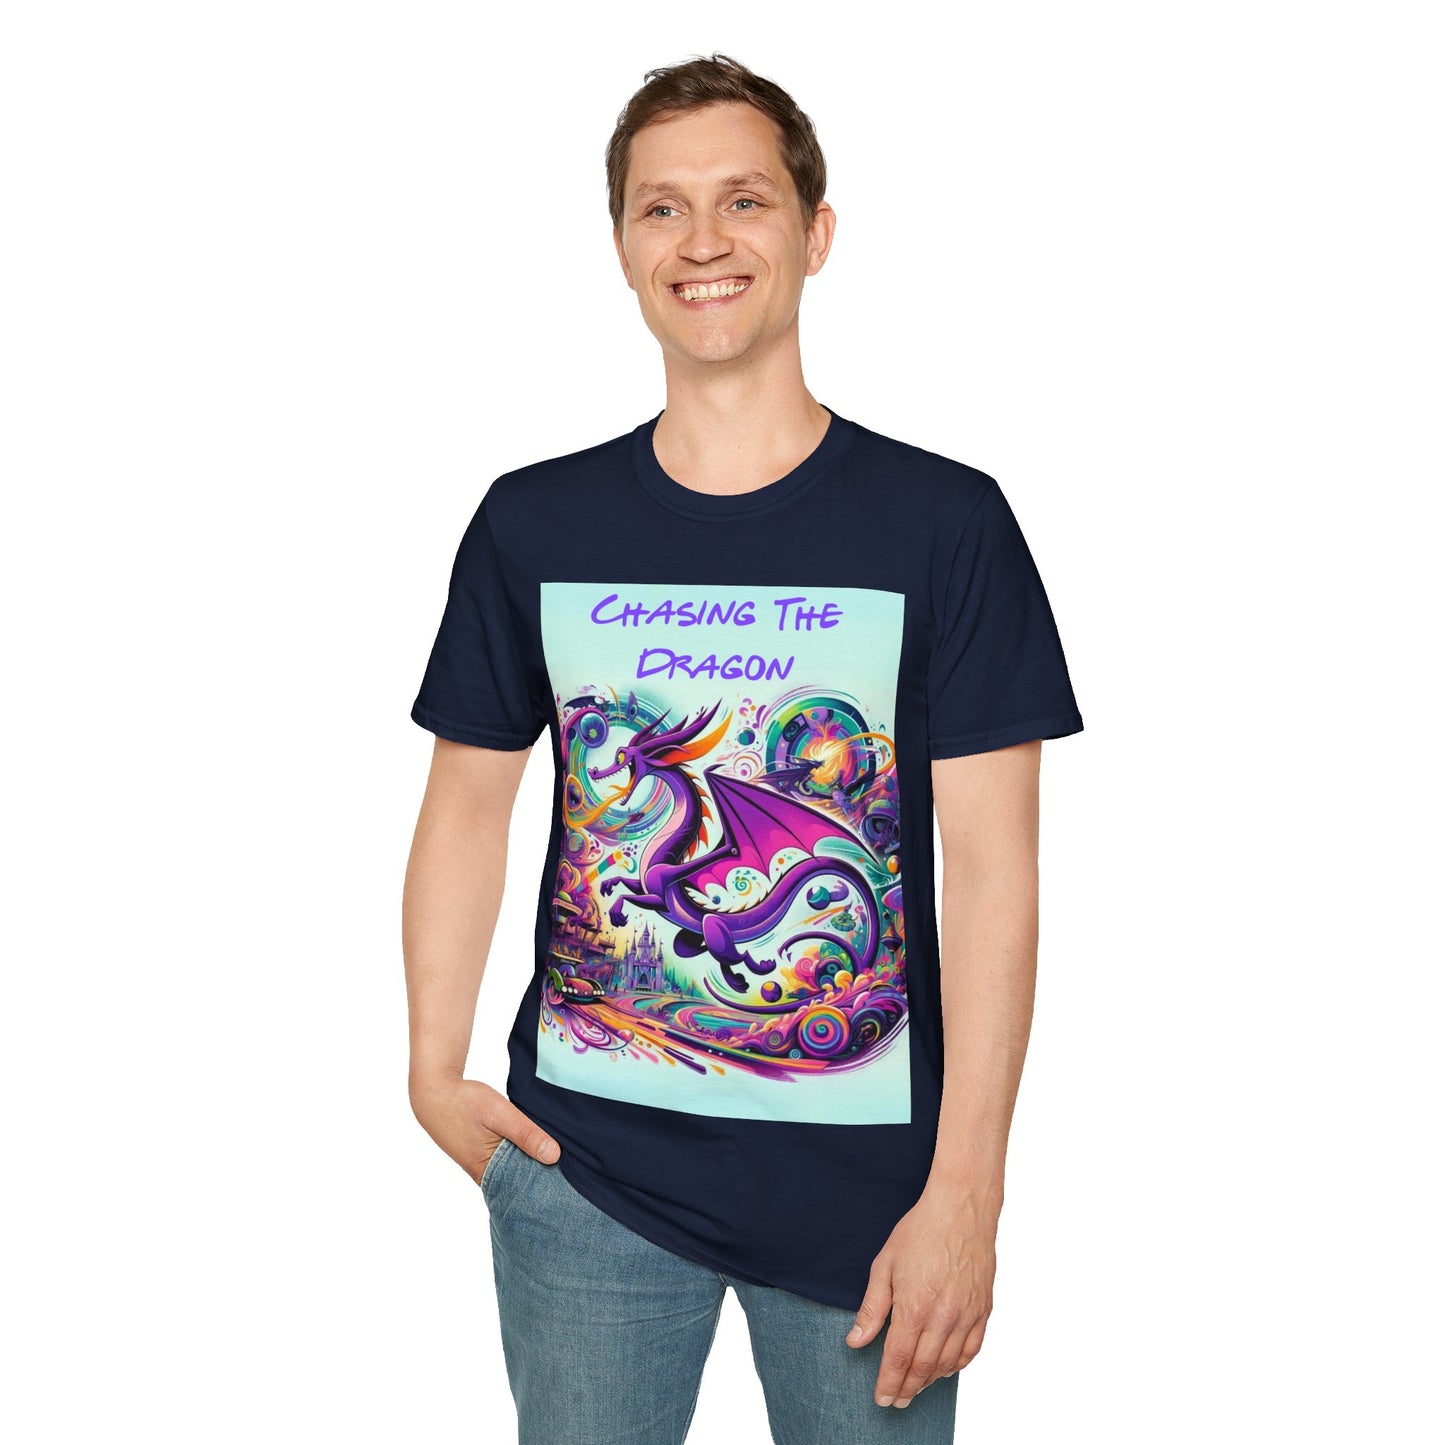 Make It Magical: "Chase the Dragon" Unisex Fantasy T-Shirt